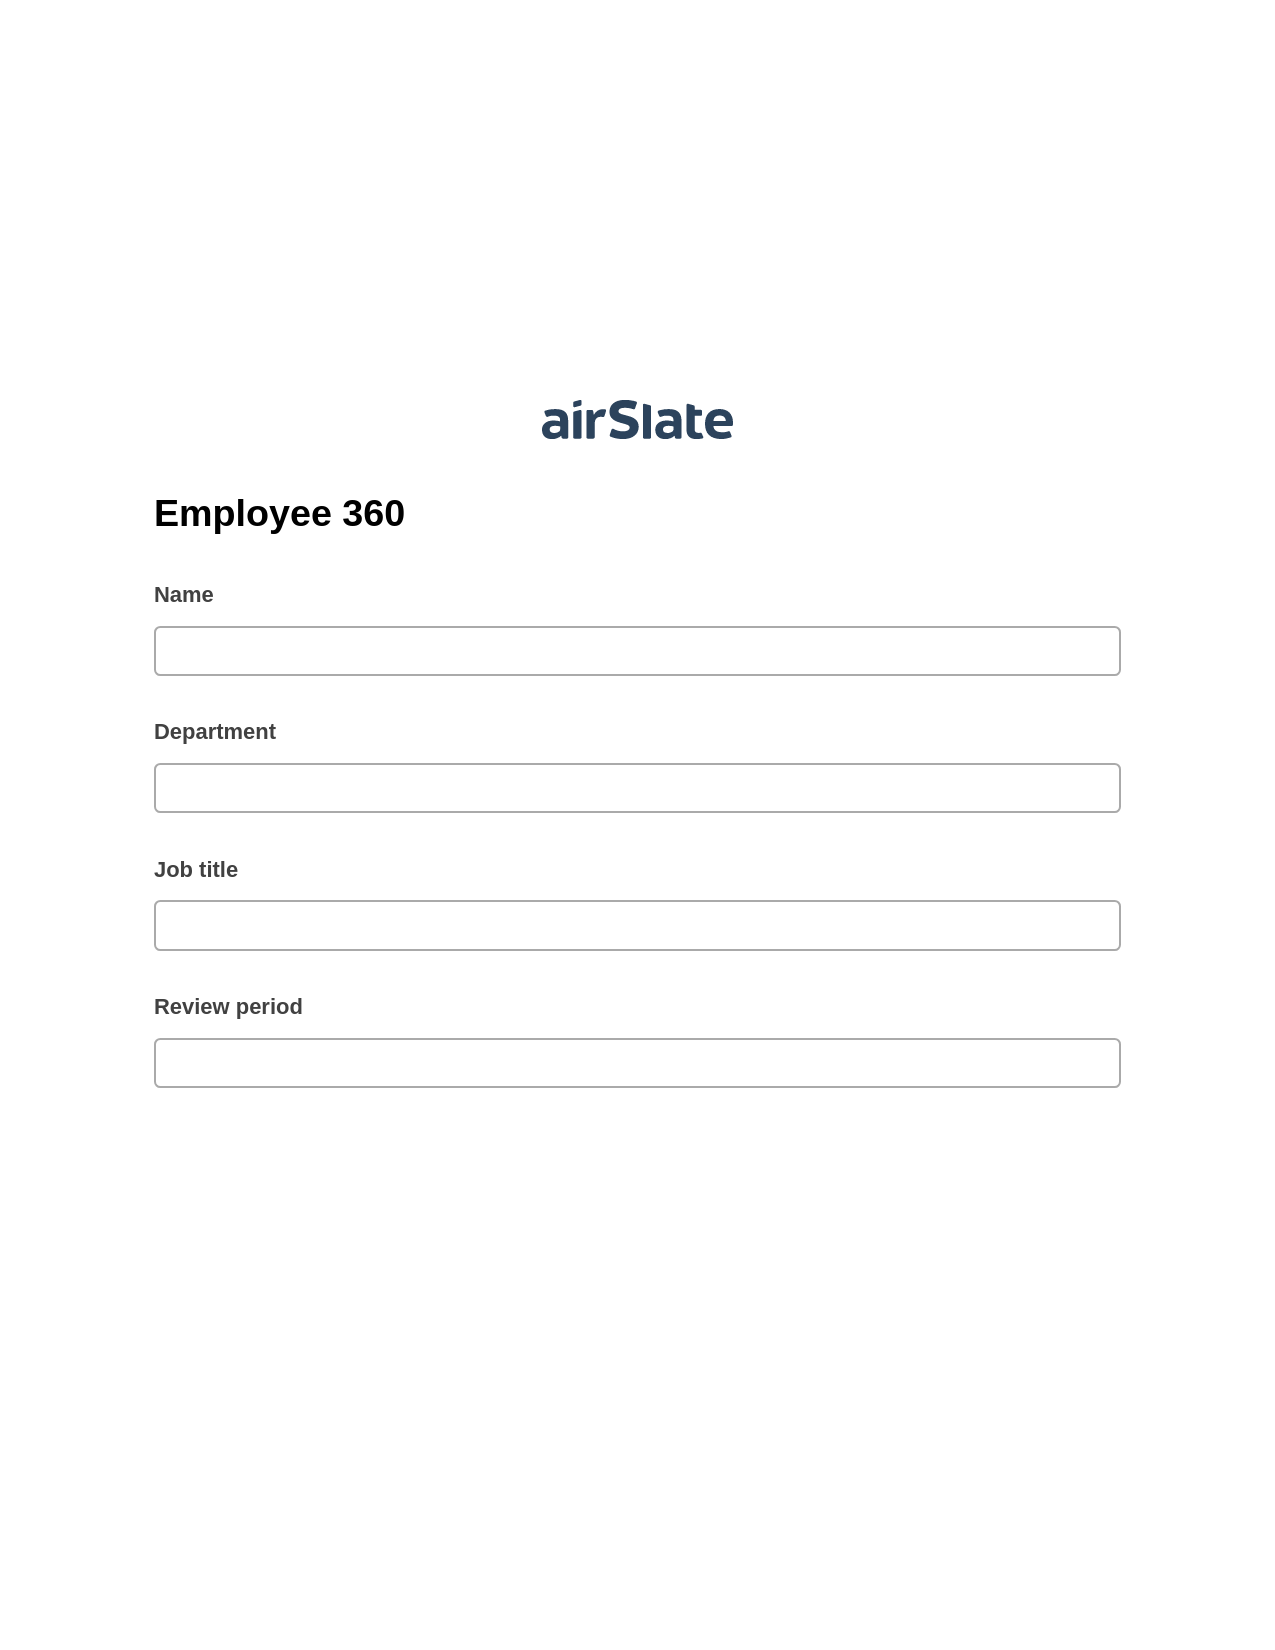 Multirole Employee 360 Pre-fill from Salesforce Records Bot, Export to MS Dynamics 365 Bot, Export to Smartsheet